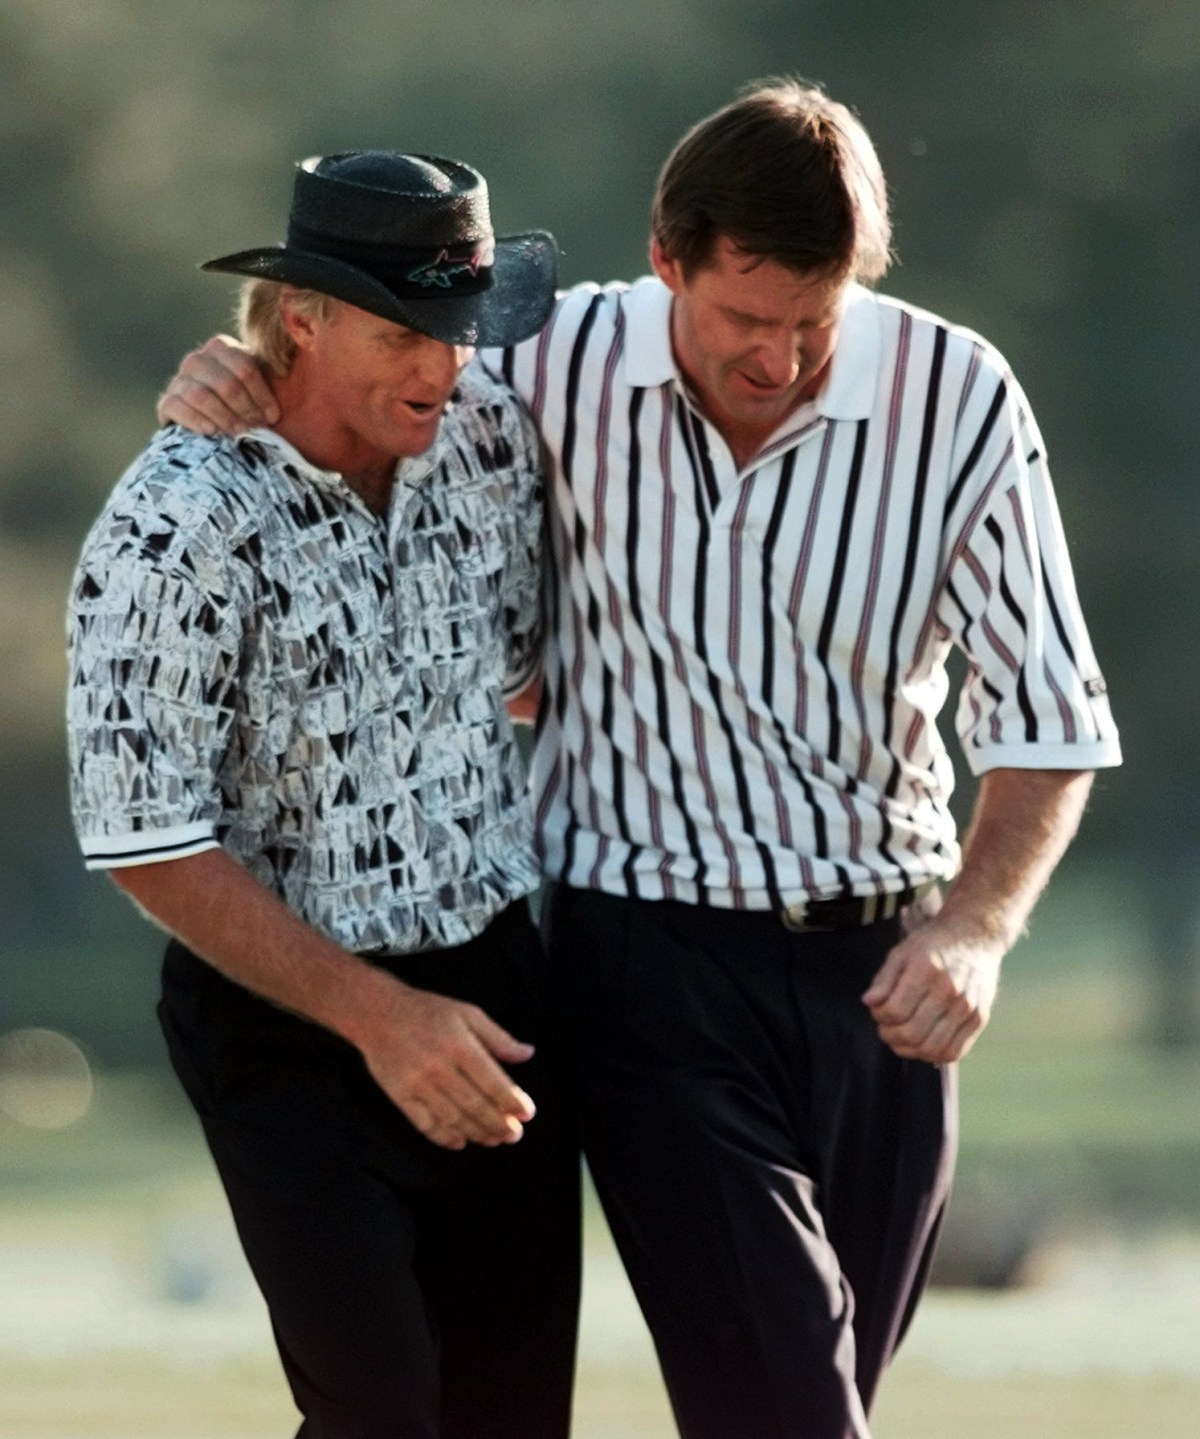 FILE - In this April 14, 1996, file photo, England's Nick Faldo, right, and Australia's Greg Norman walk off the 18th hole after Faldo won his third Masters golf tournament at the Augusta National Golf Club in Augusta, Ga. Faldo is the only multiple Masters champion to have never led going into the final round. (AP Photo/Dave Martin, File)